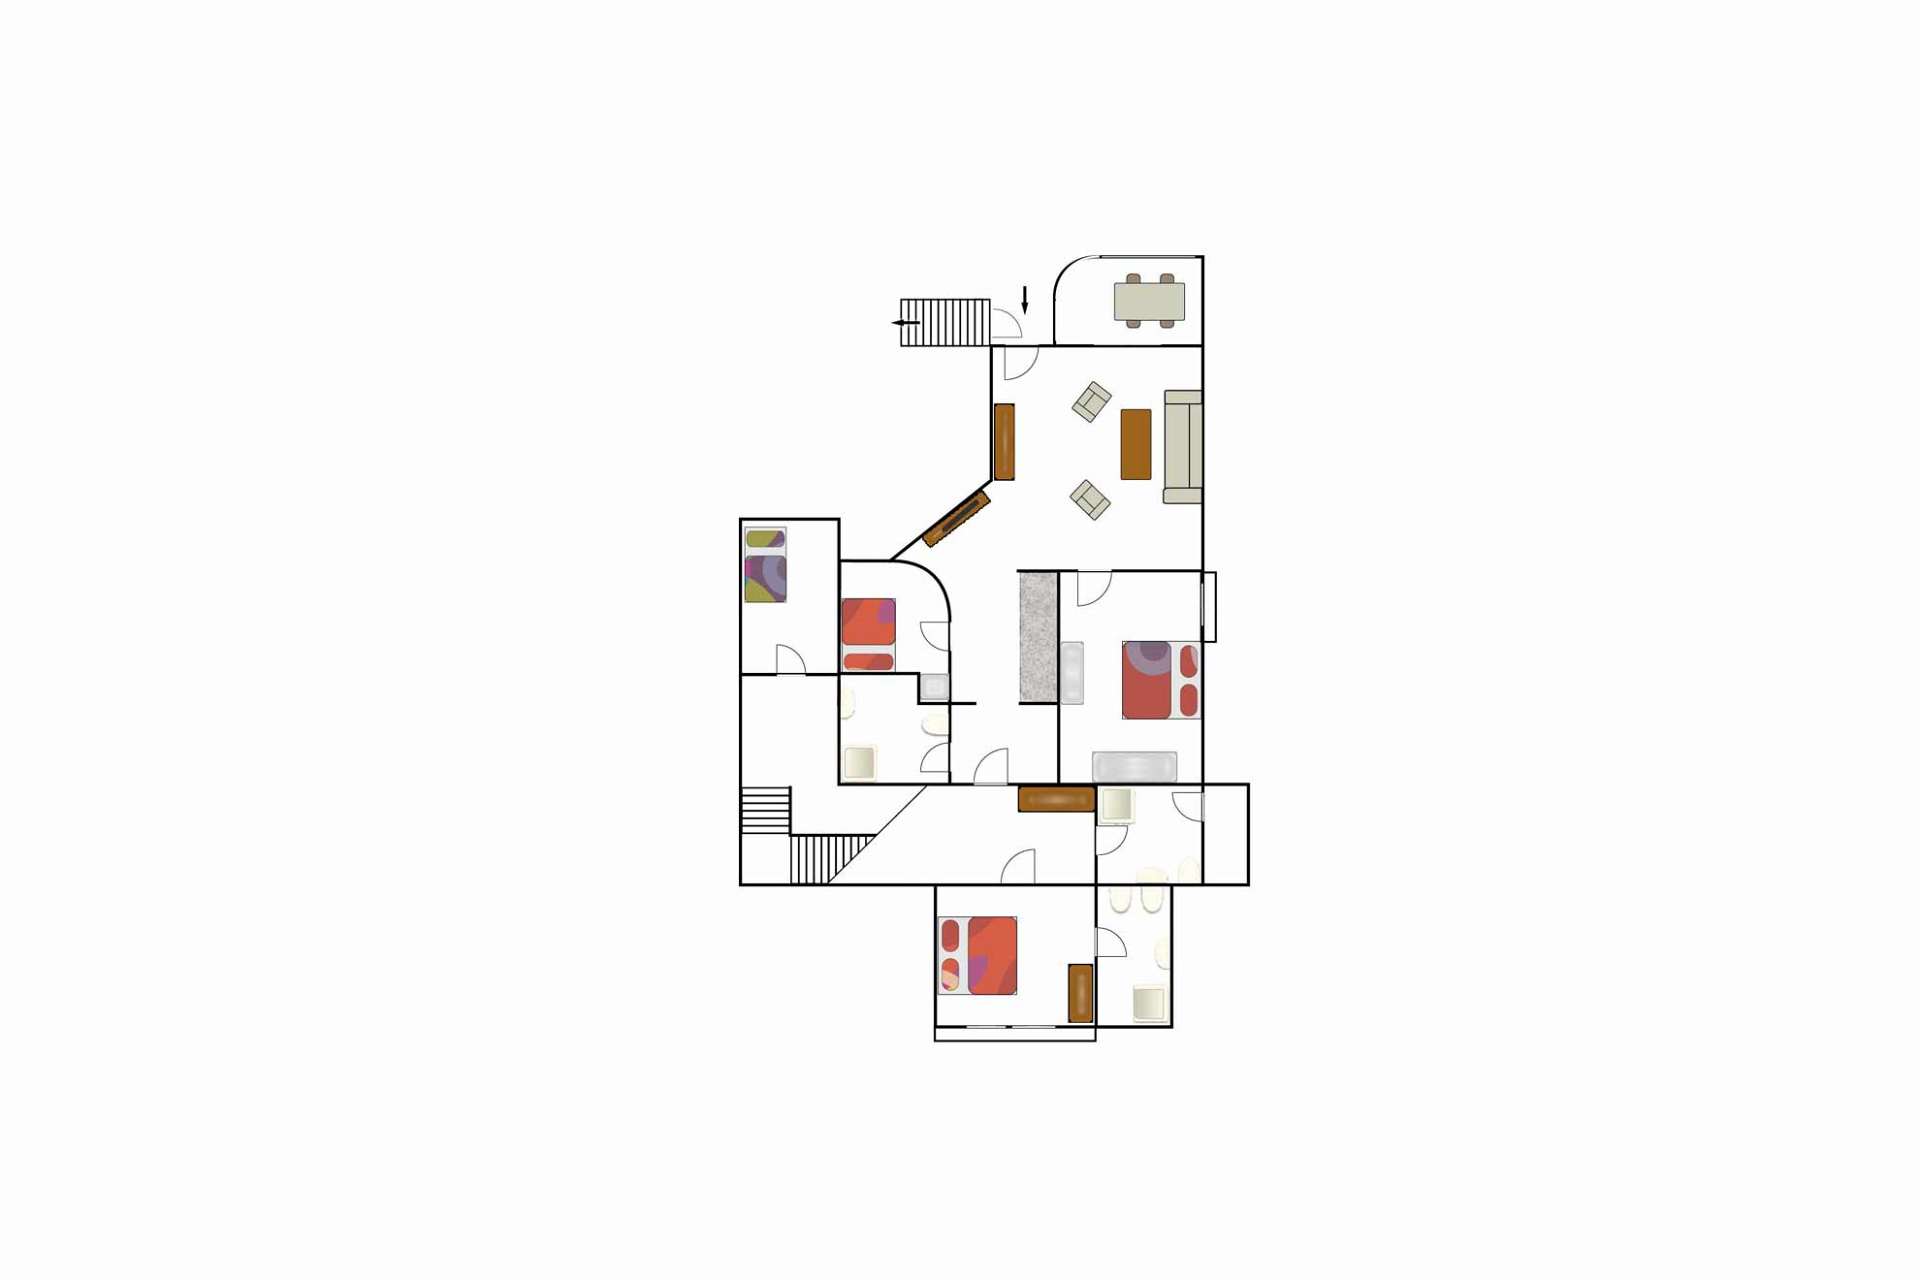 Layout of basement of Villa Andalucía, Chayofa, Tenerife. Not drawn in scale.